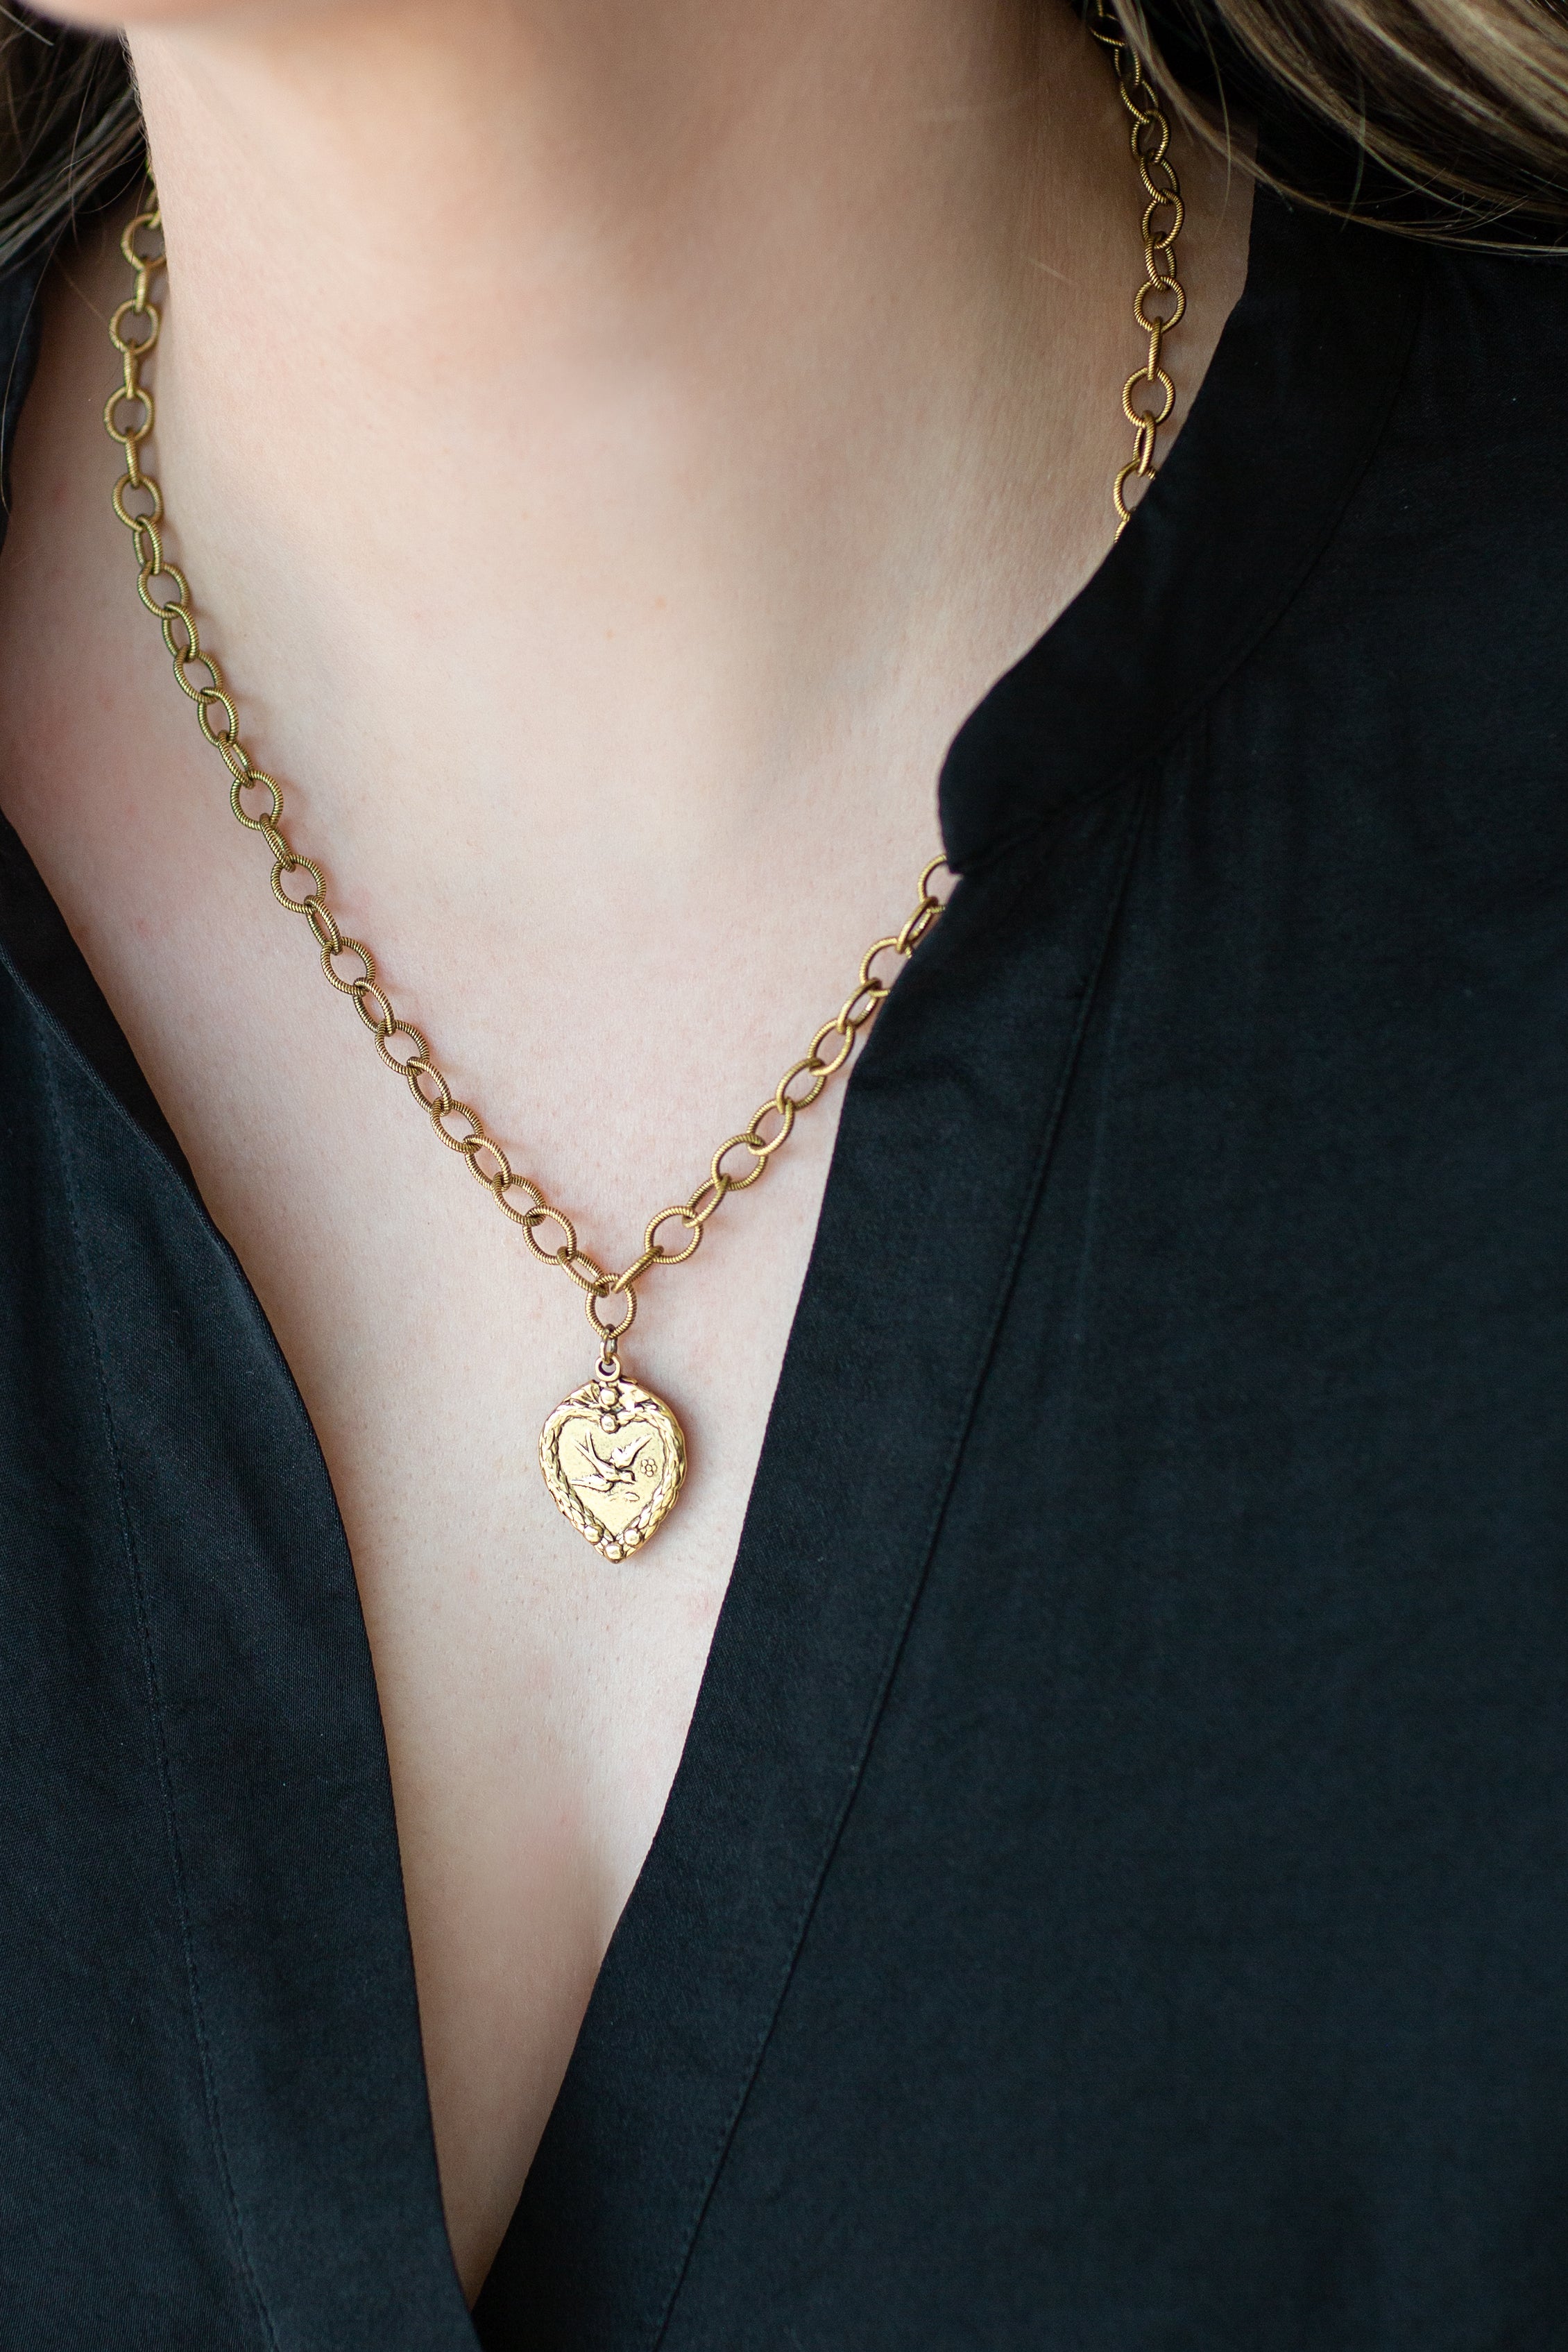 Vintage Reproduction Gold Plated Chain with Dove Heart